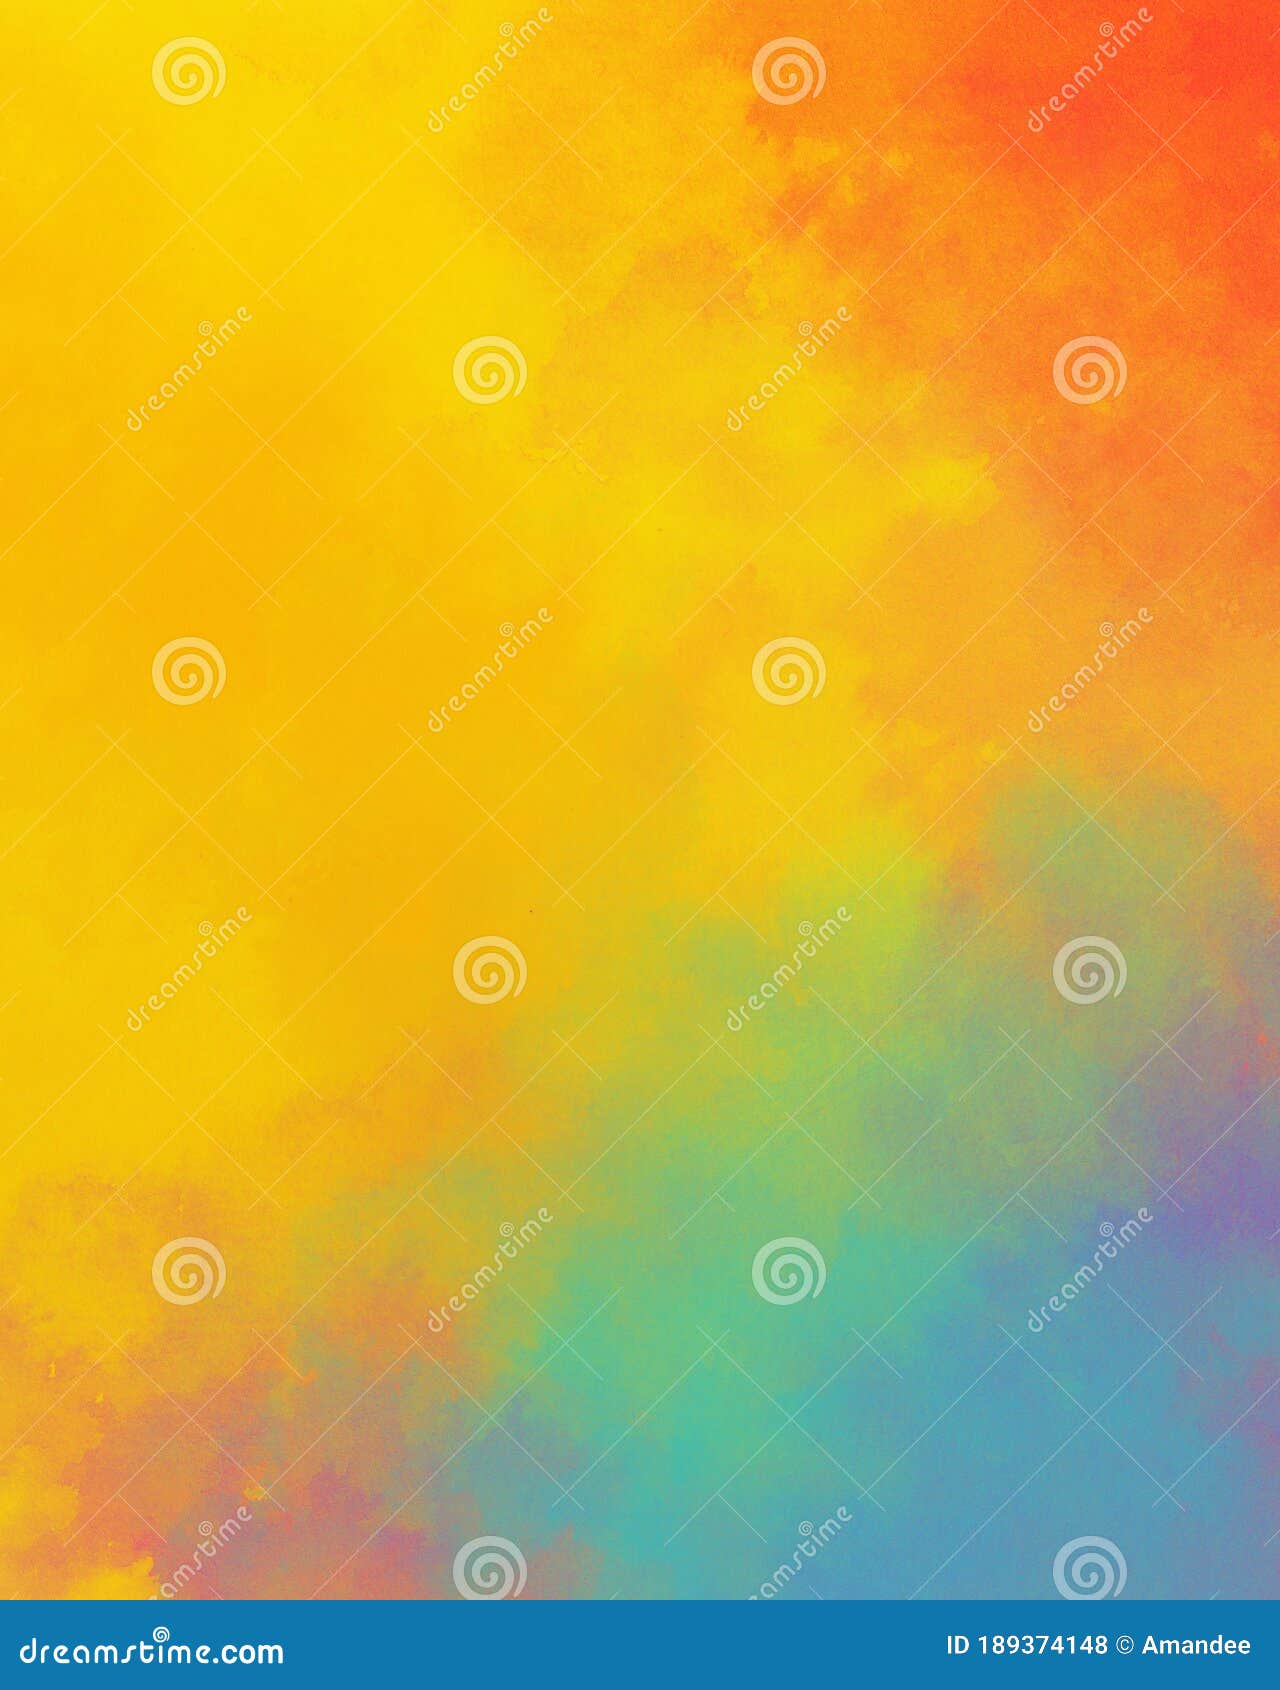 watercolor background in colorful yellow blue red and orange colors, rainbow color background  with bright abstract color sp